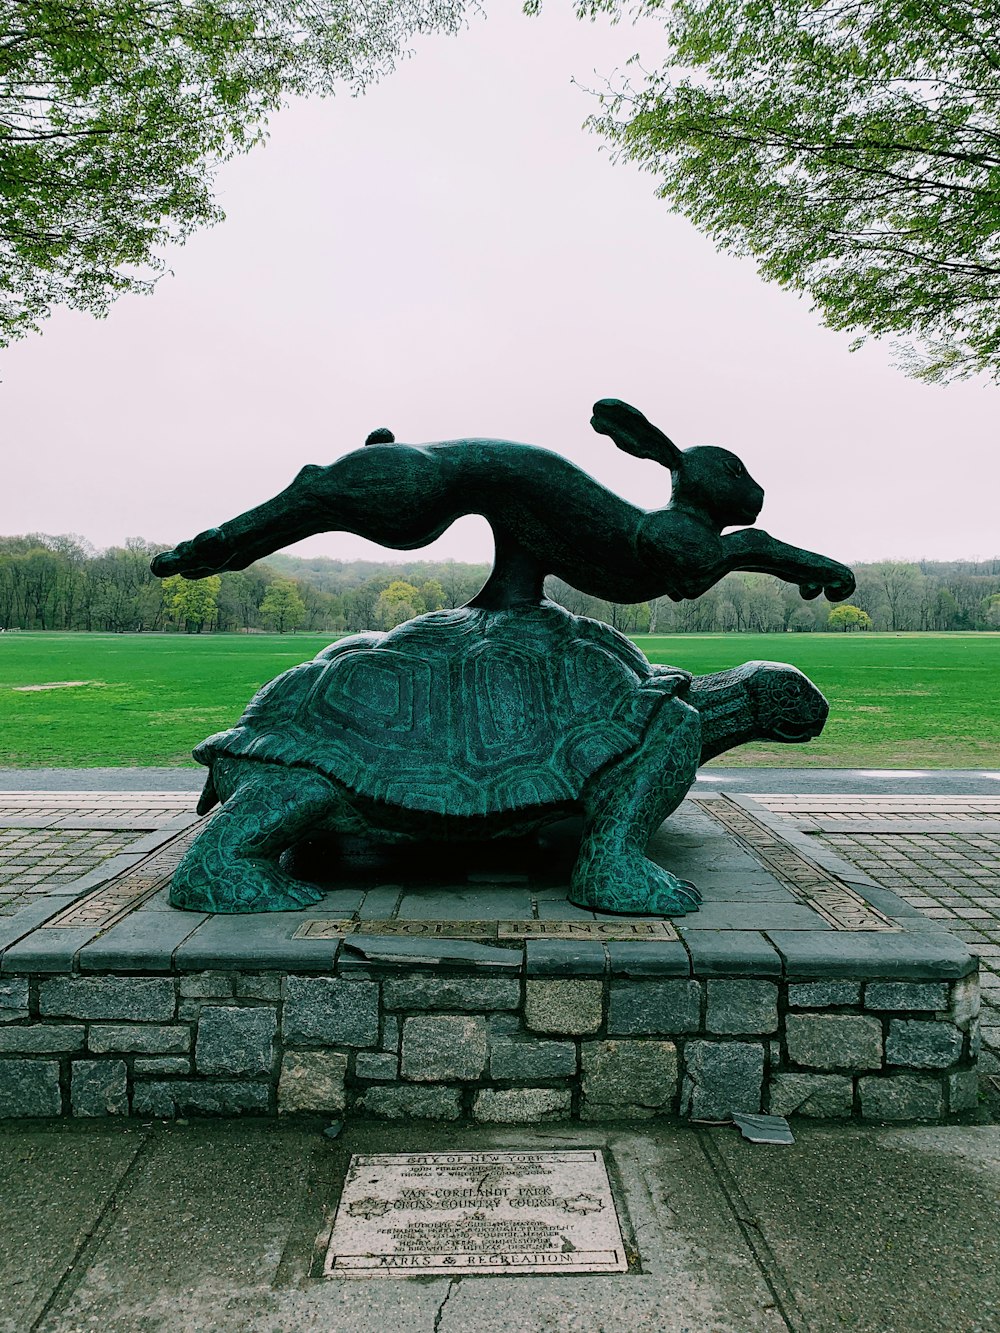 rabbit and turtle statue